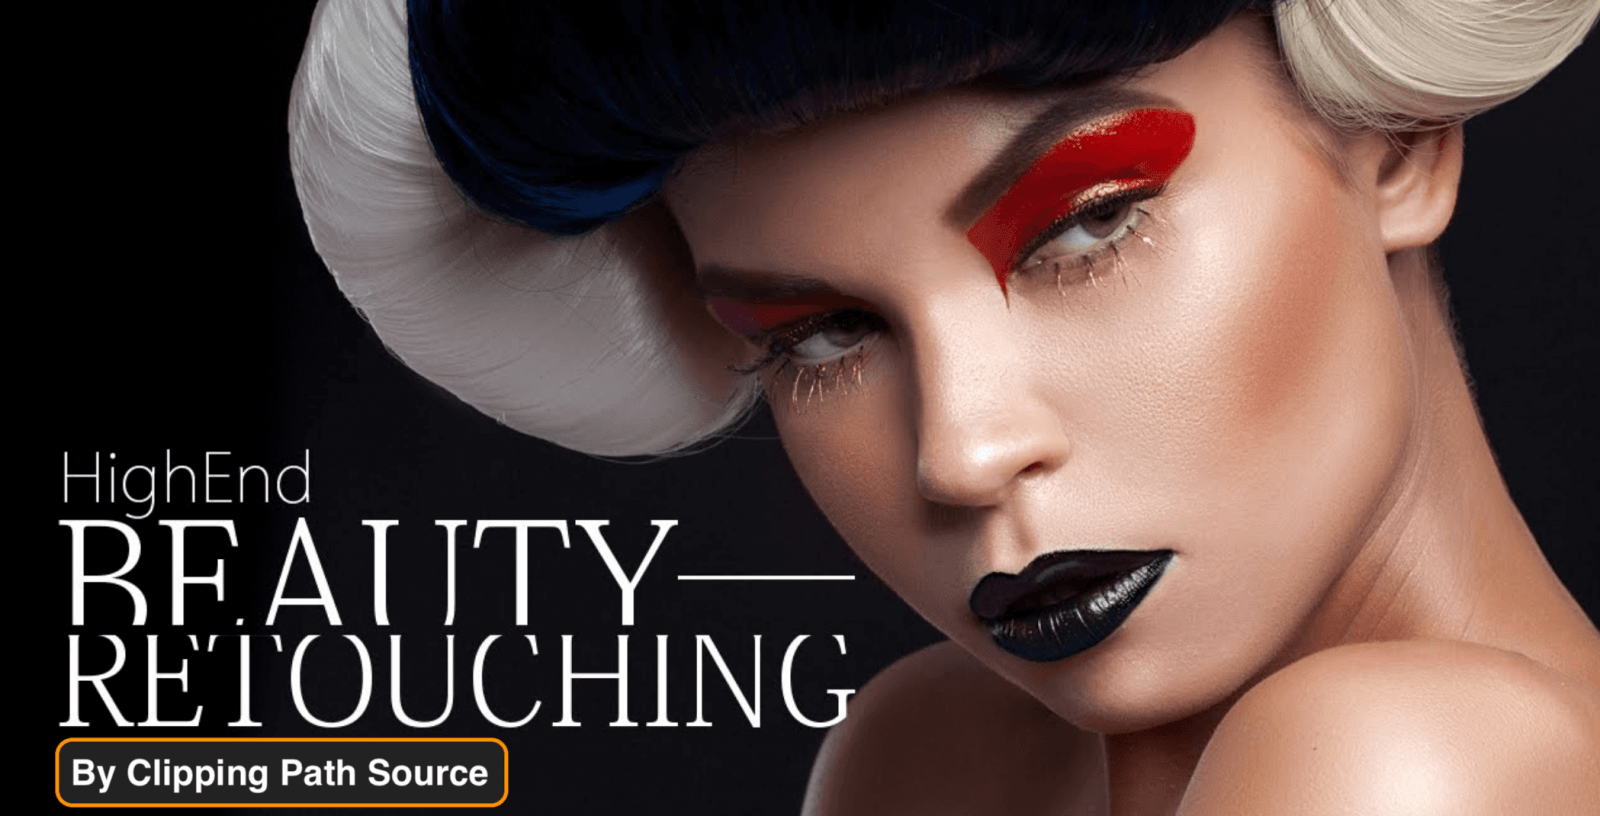 Photoshop Retouching at Clipping Path Source